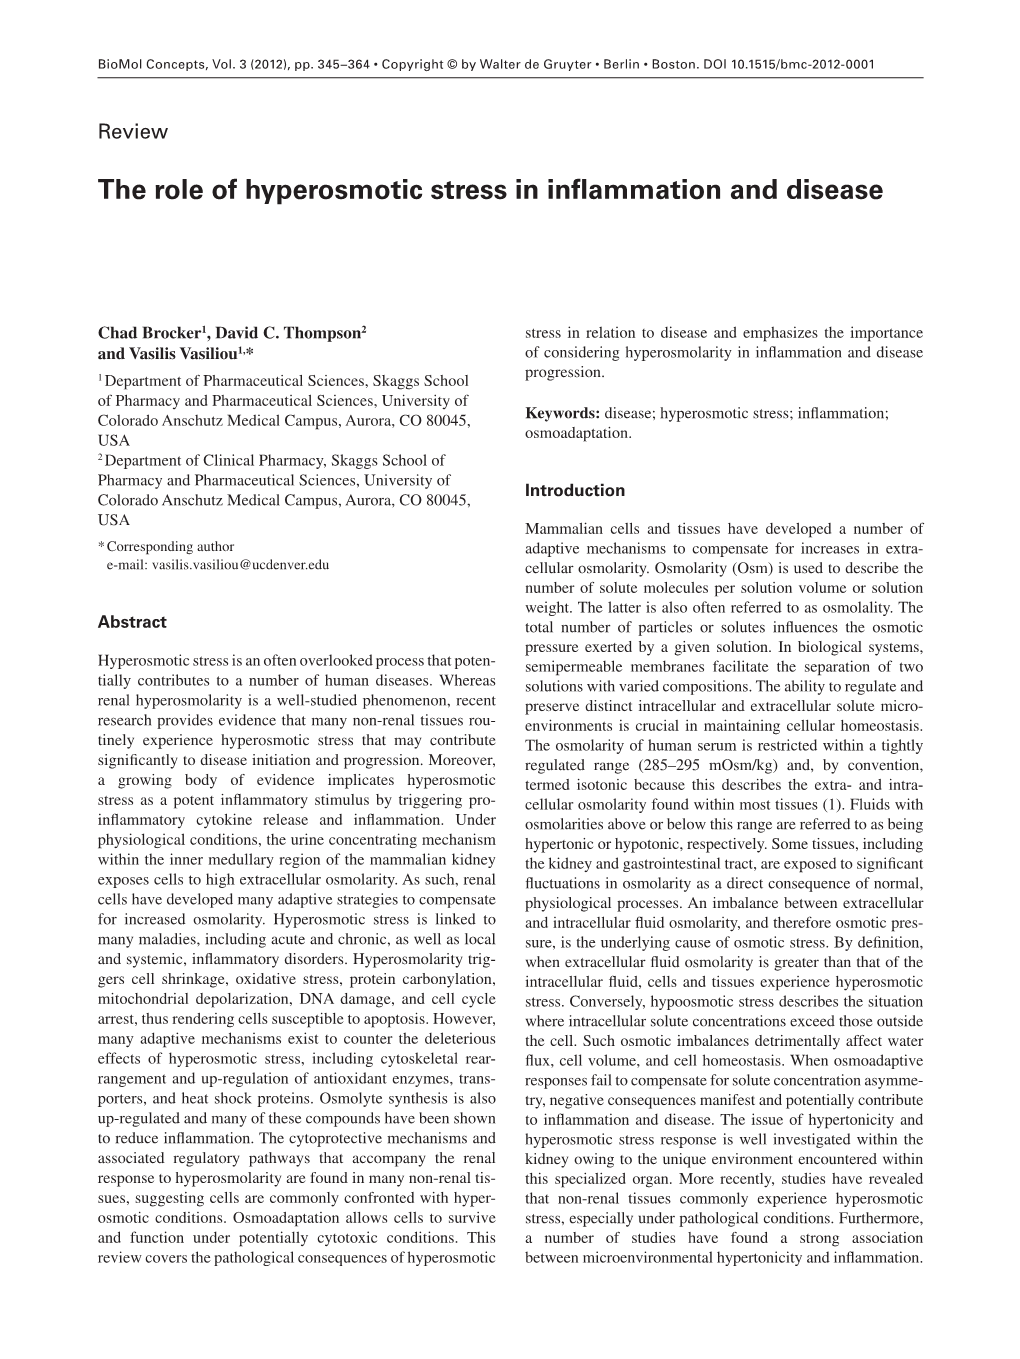 The Role of Hyperosmotic Stress in Inflammation and Disease